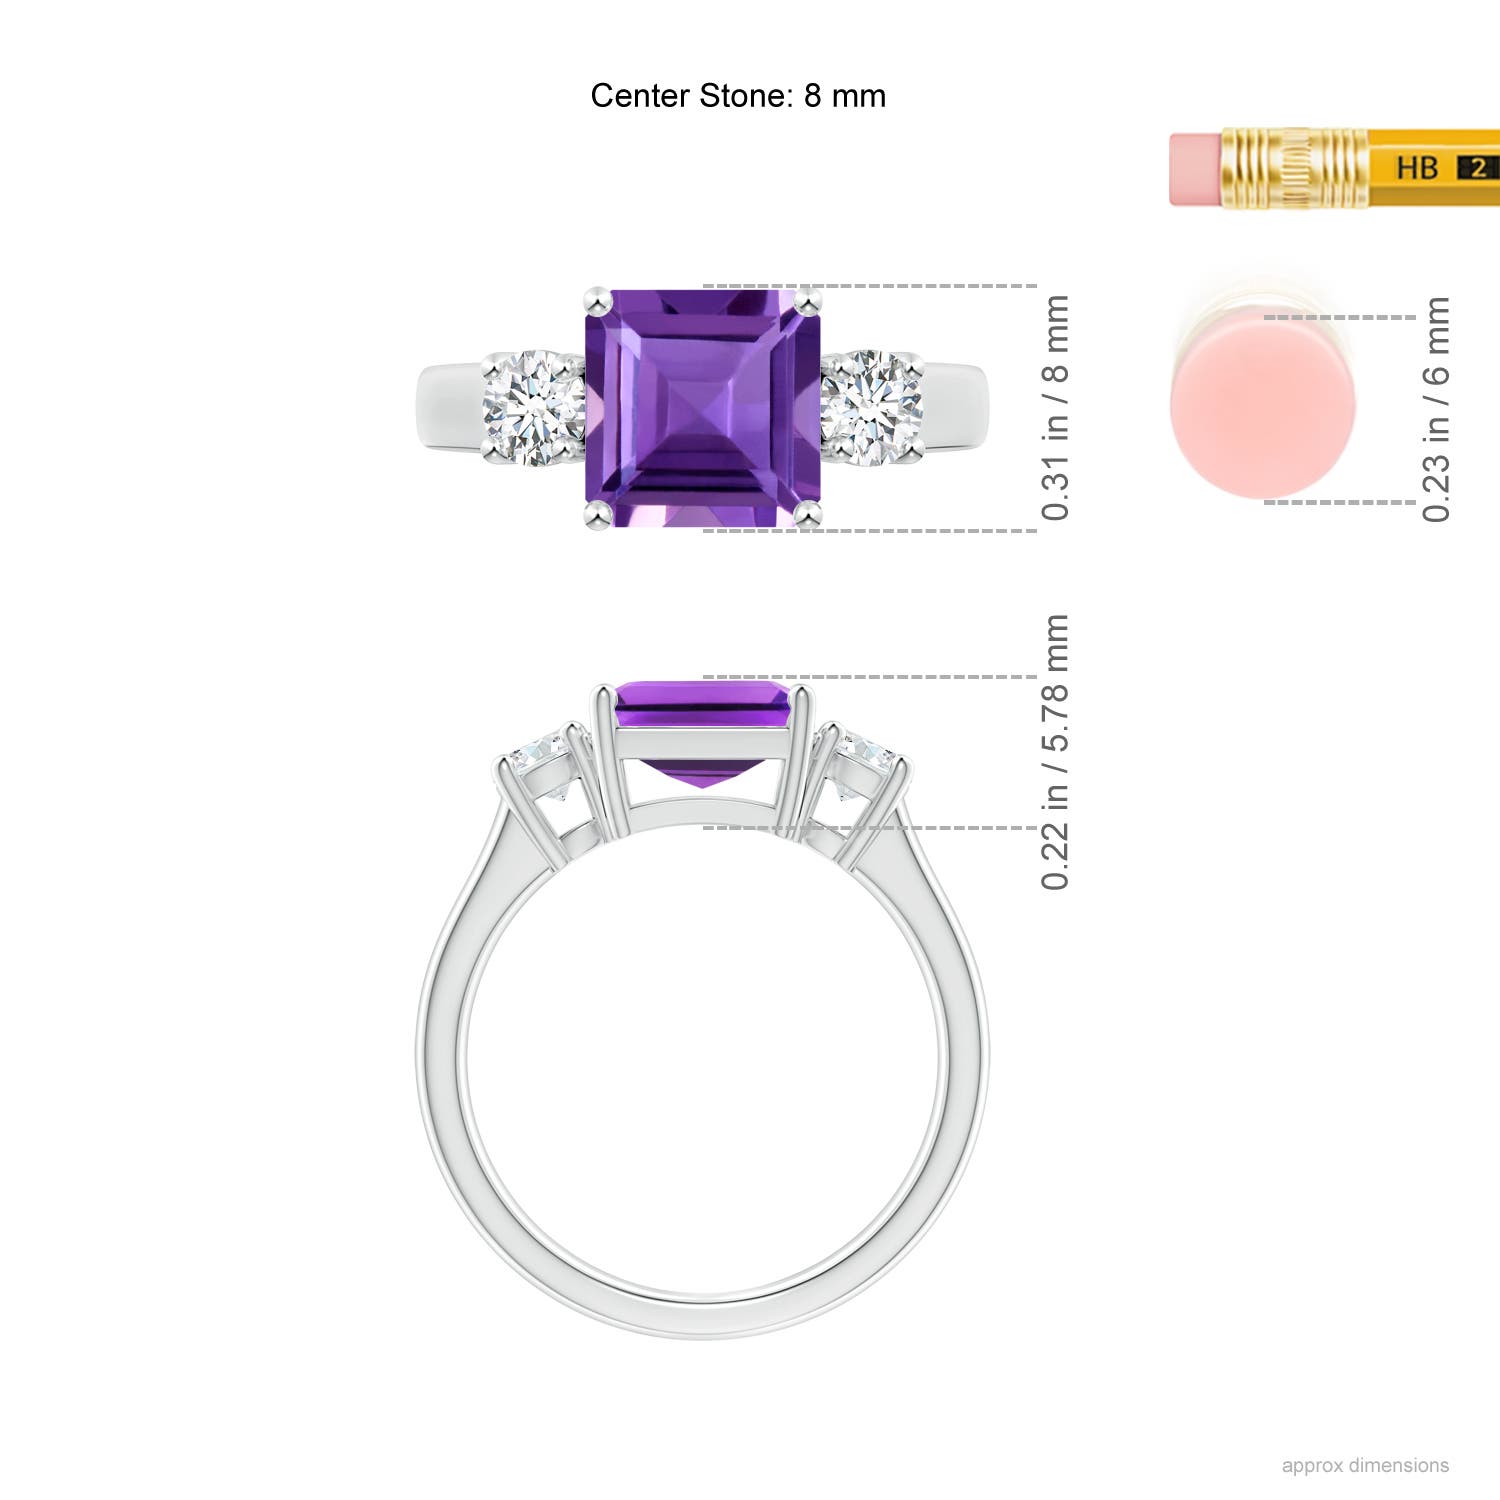 AAA - Amethyst / 2.46 CT / 14 KT White Gold